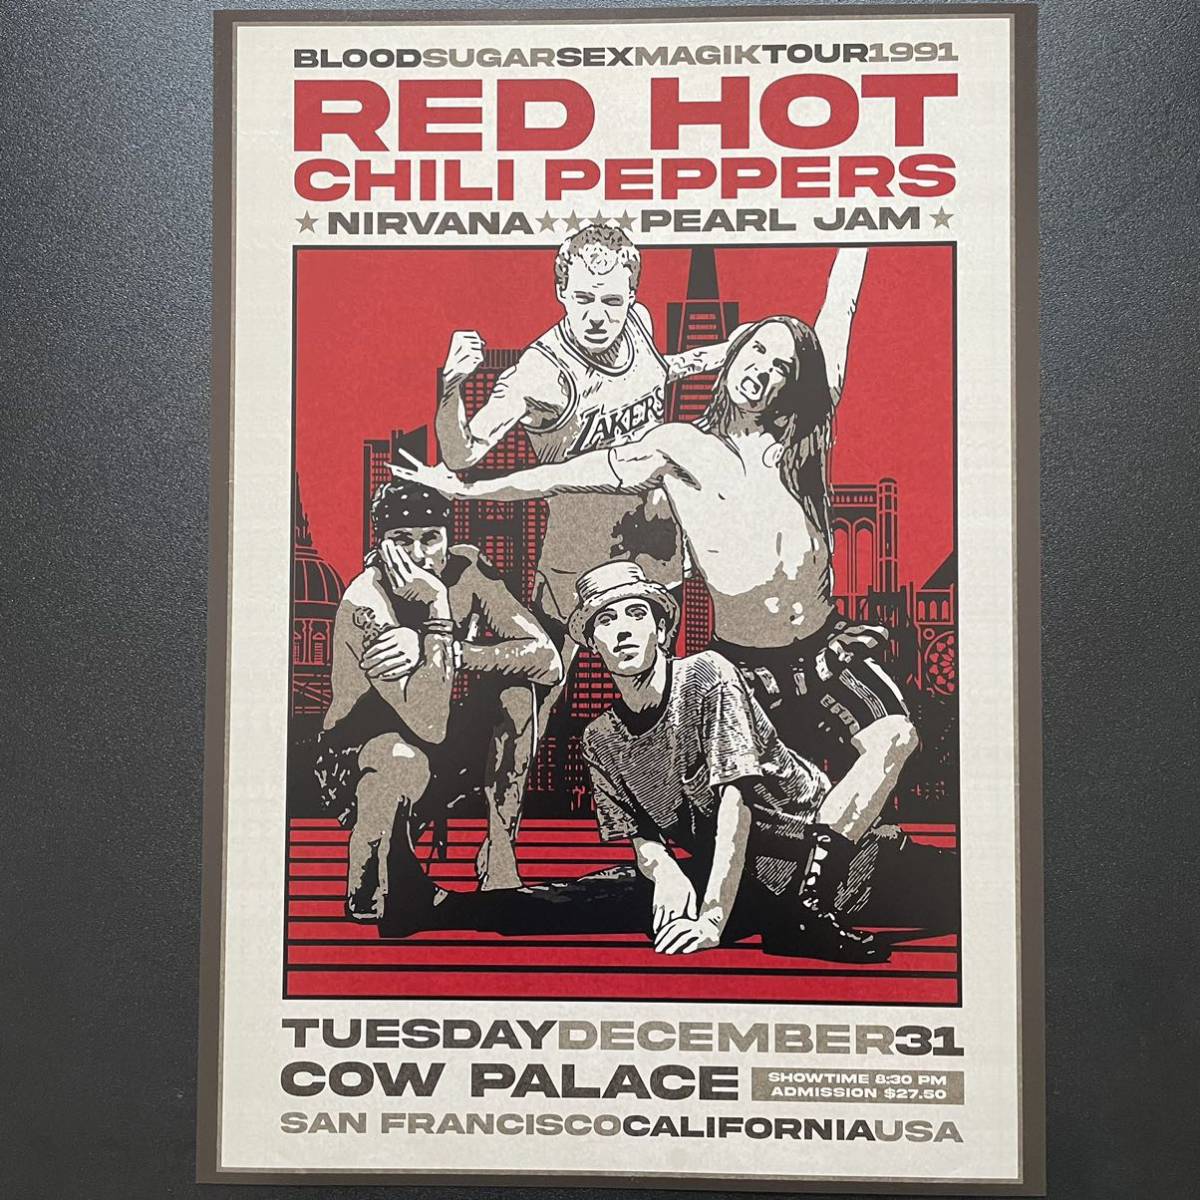 RED HOT B5 CHILI PEPPERS ① ポスター レッチリ 送料込み 額付き 